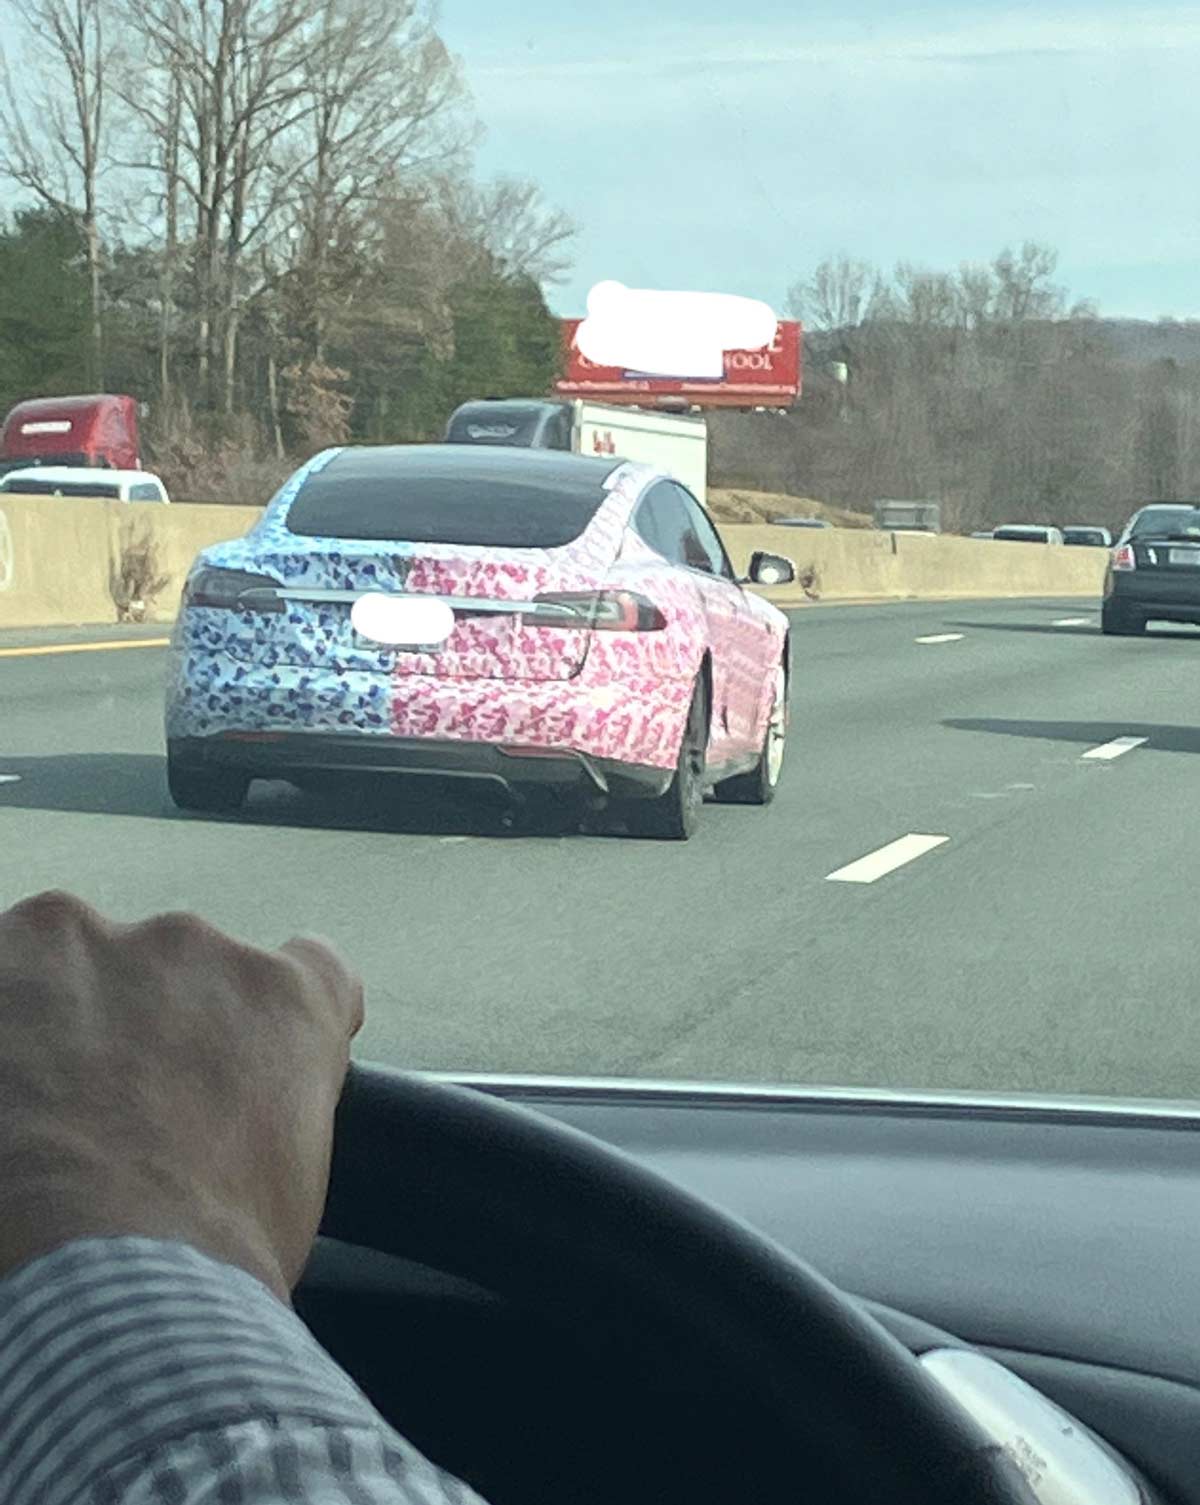 "Give me the ugliest car you got"